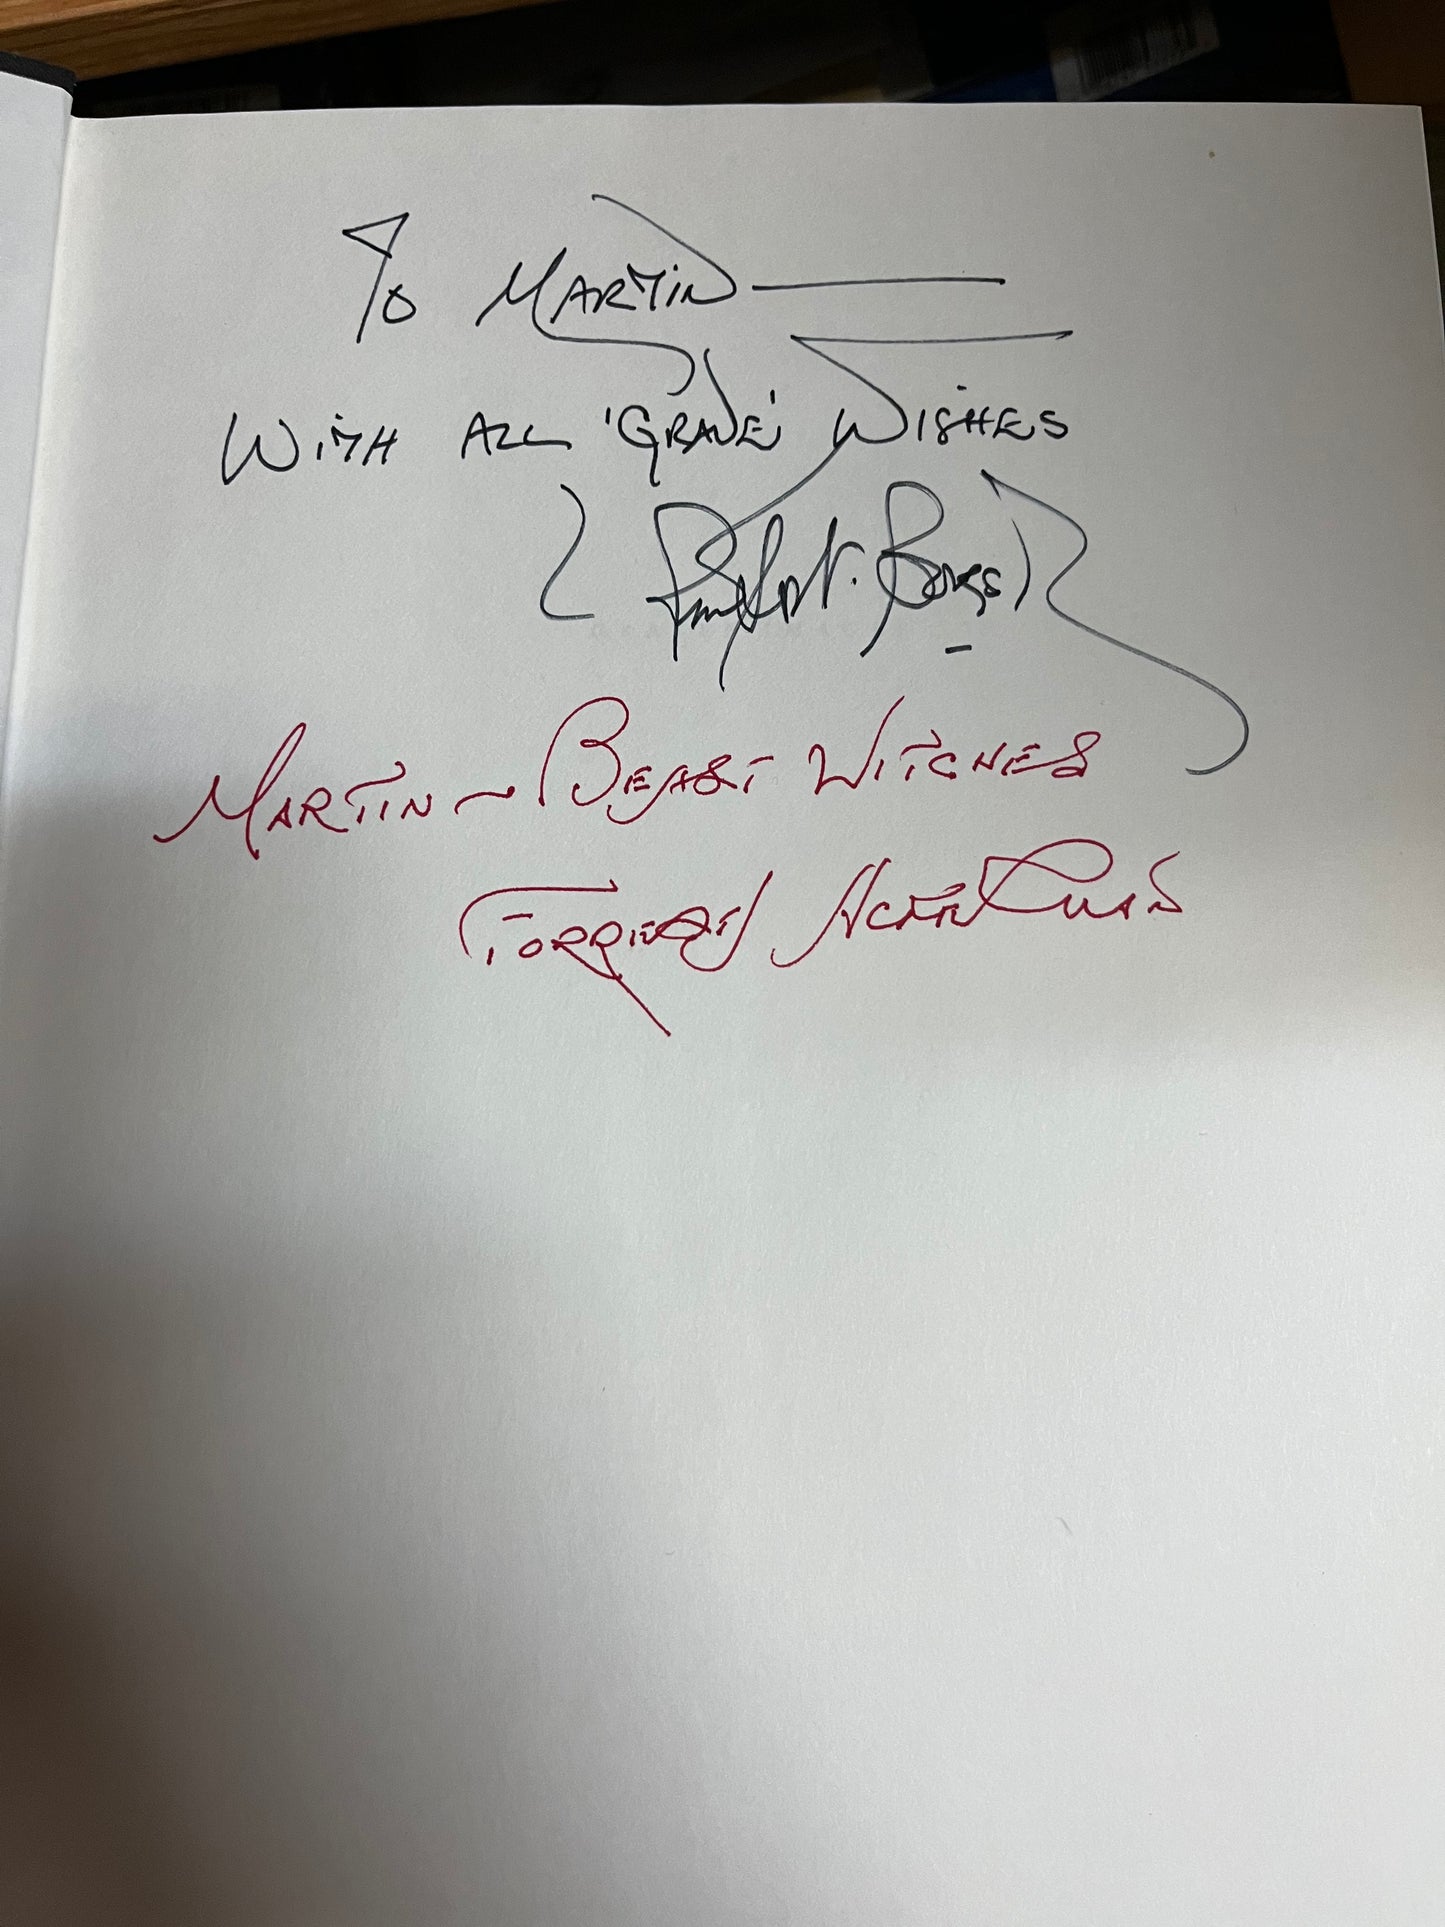 GRAVEN IMAGES (book with two autographs)